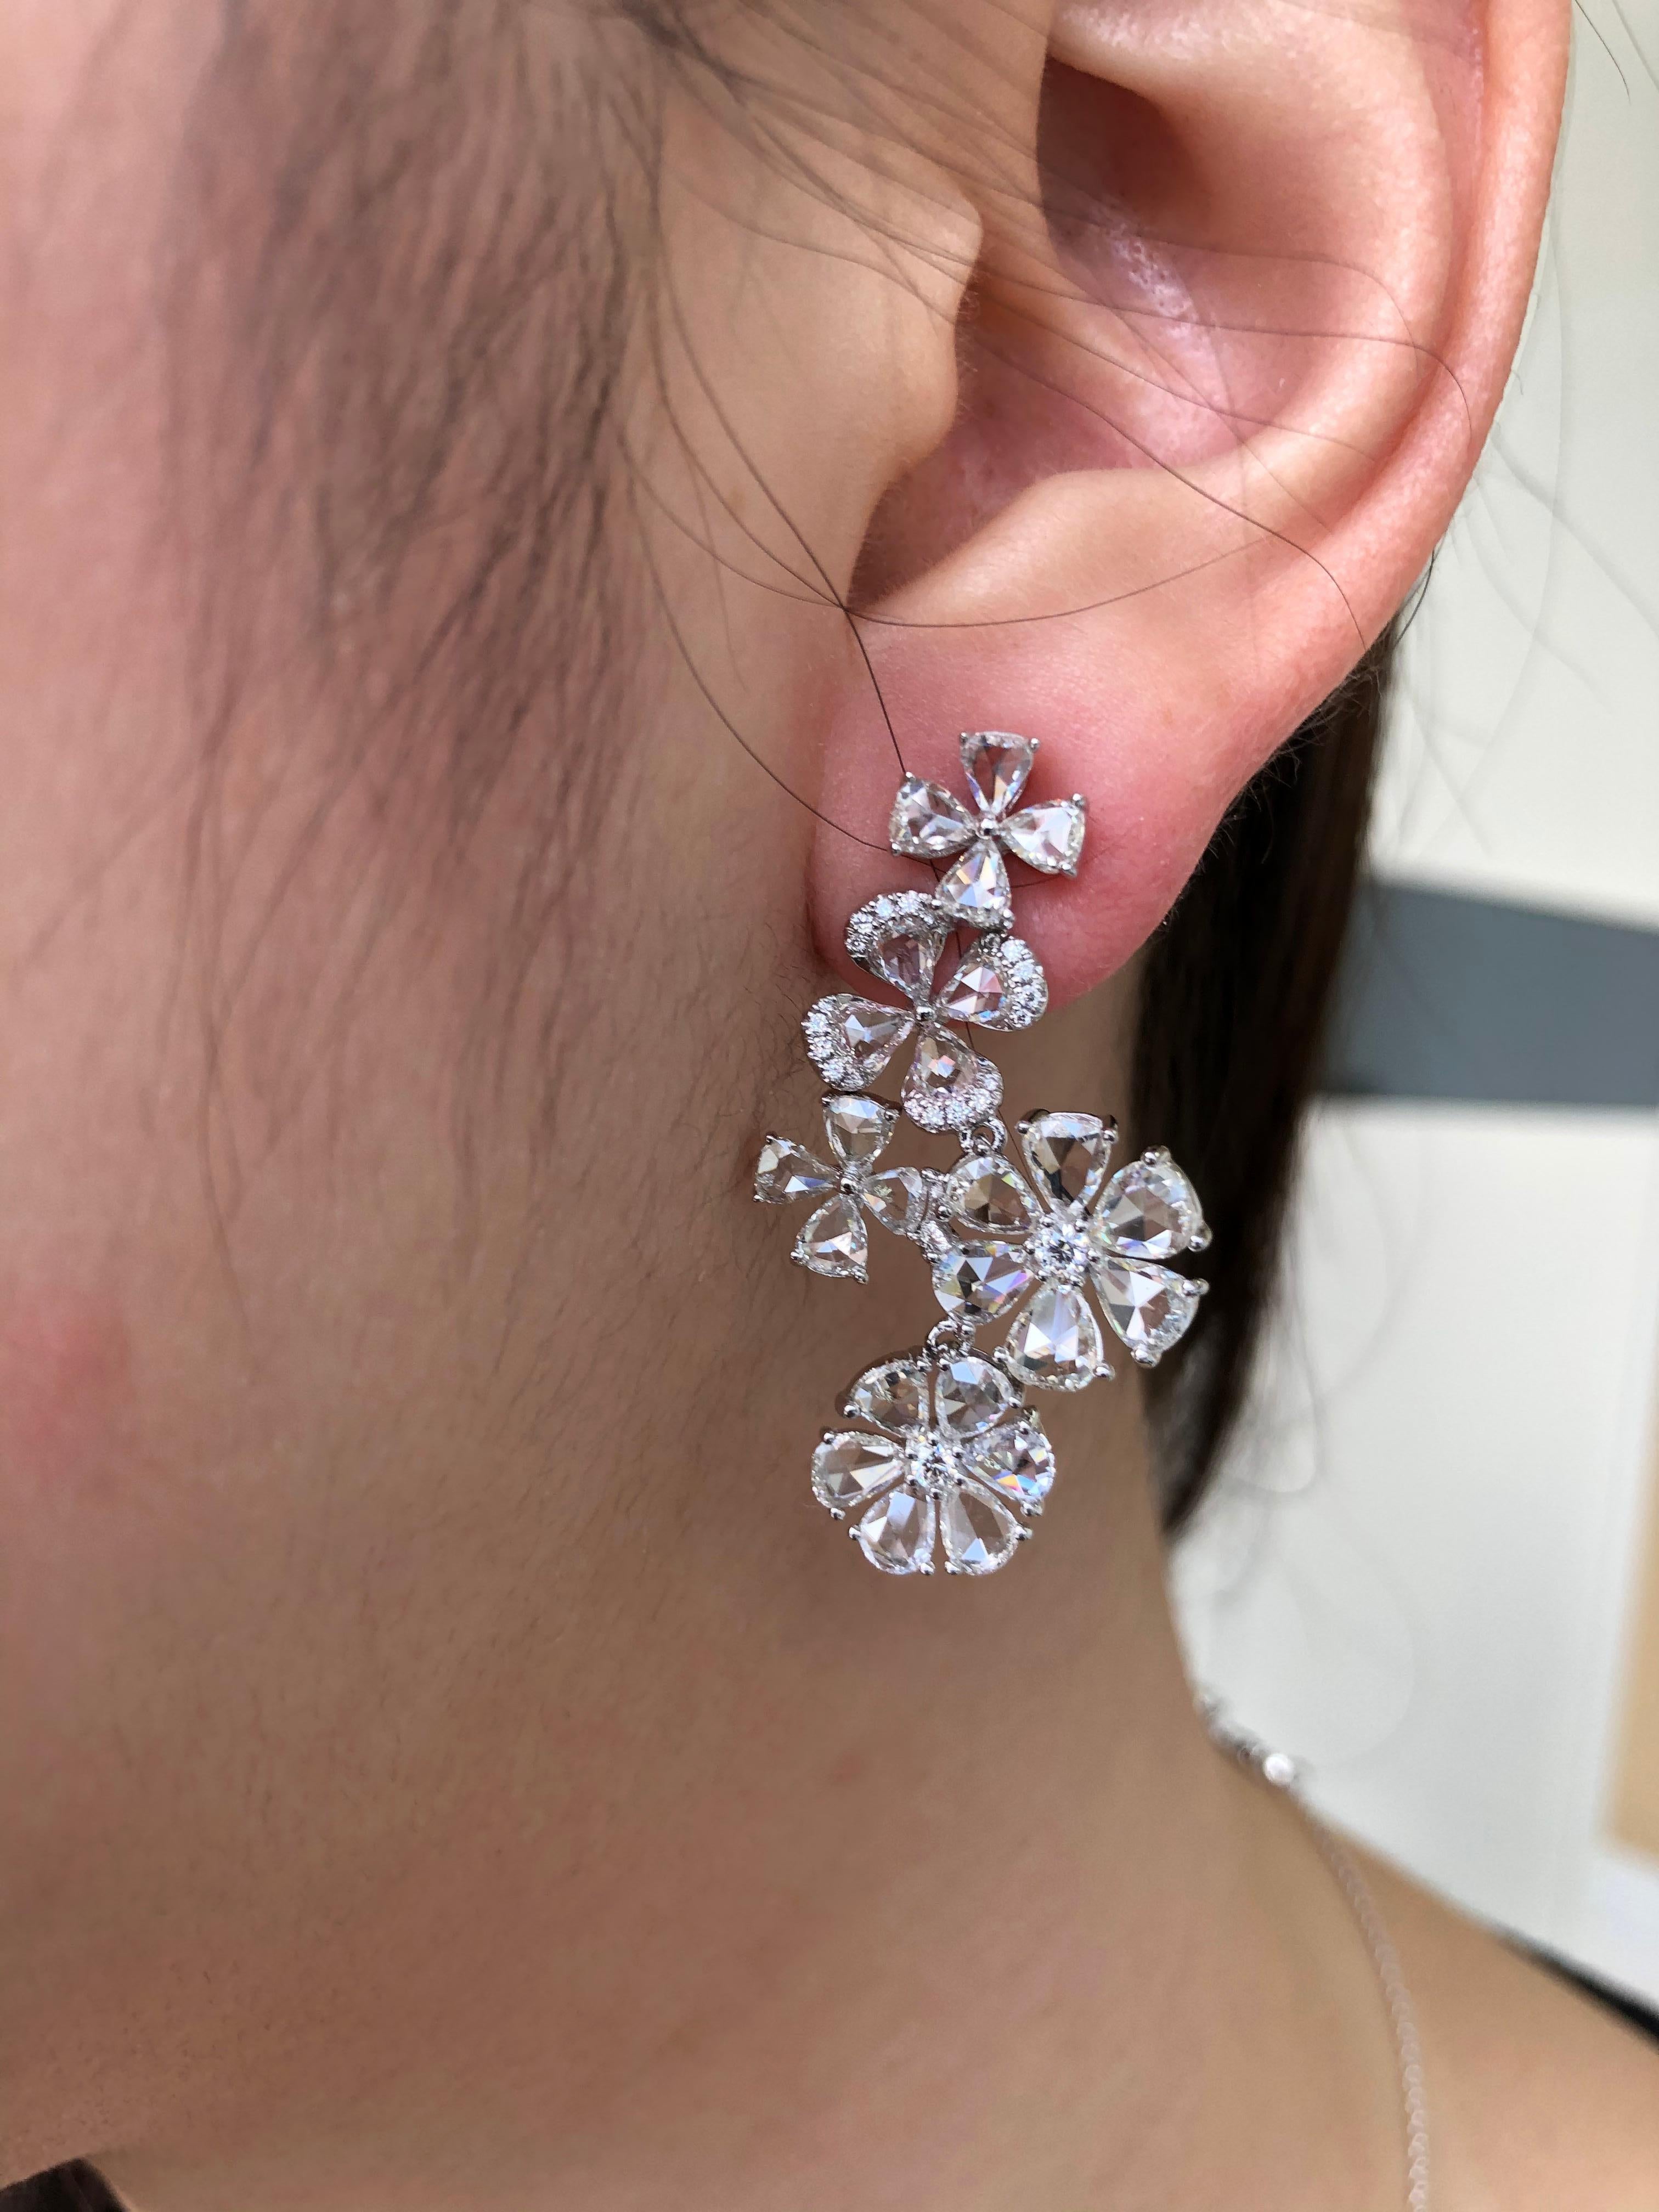 JR 7.73 carats Rose Cut Diamond Flower 18 karat White Gold Earring

Flowers made of rose-cut diamonds is what dreams are made of. This rose-cut diamond flower earring looks nothing less than a dream. Its beauty is unmatched for.

Diamond Weight :